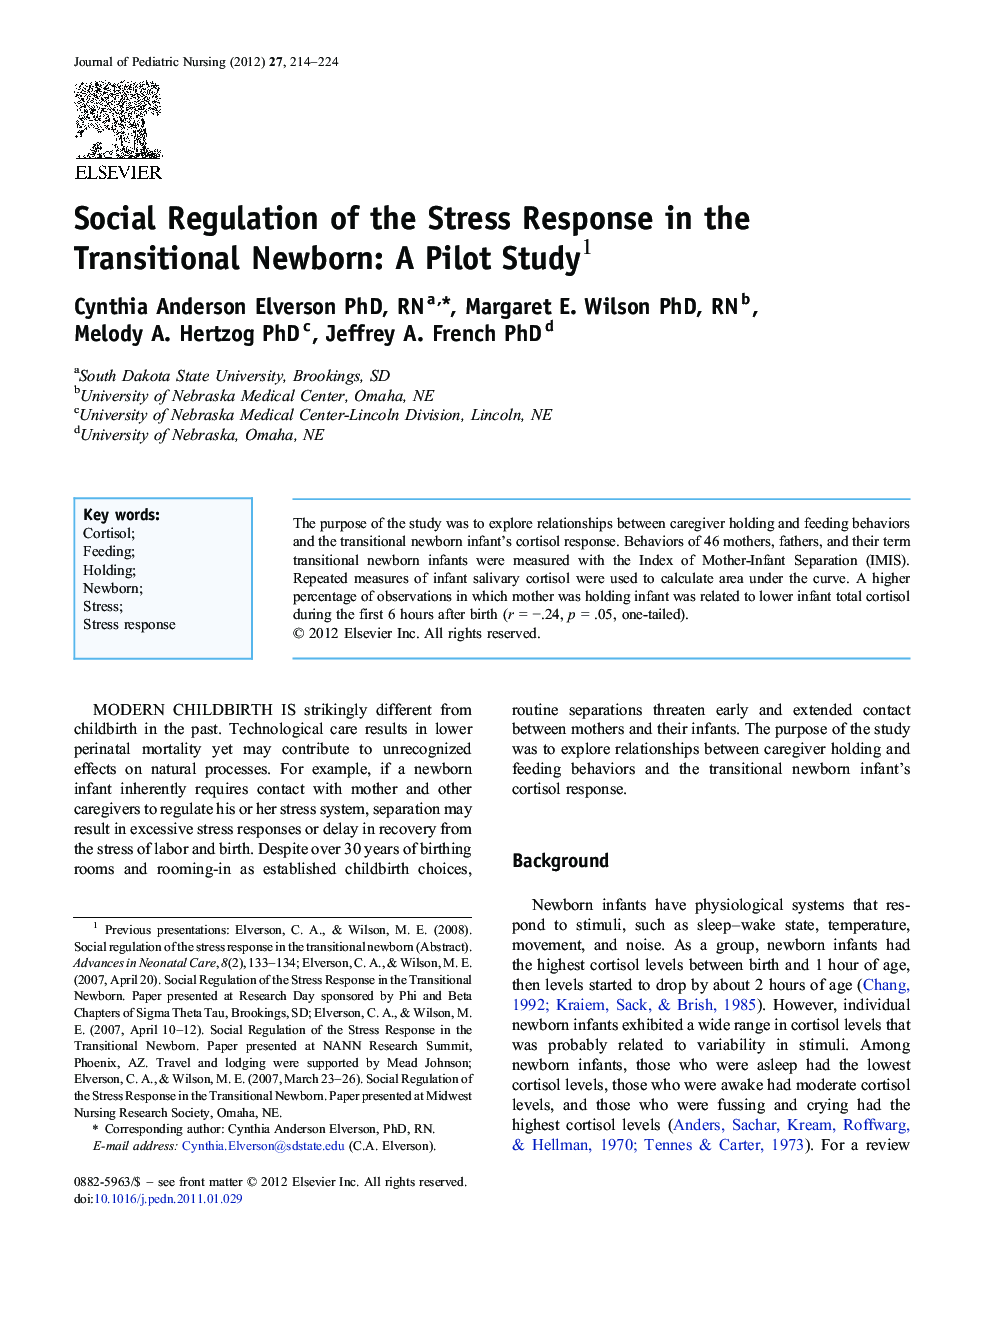 Social Regulation of the Stress Response in the Transitional Newborn: A Pilot Study 1